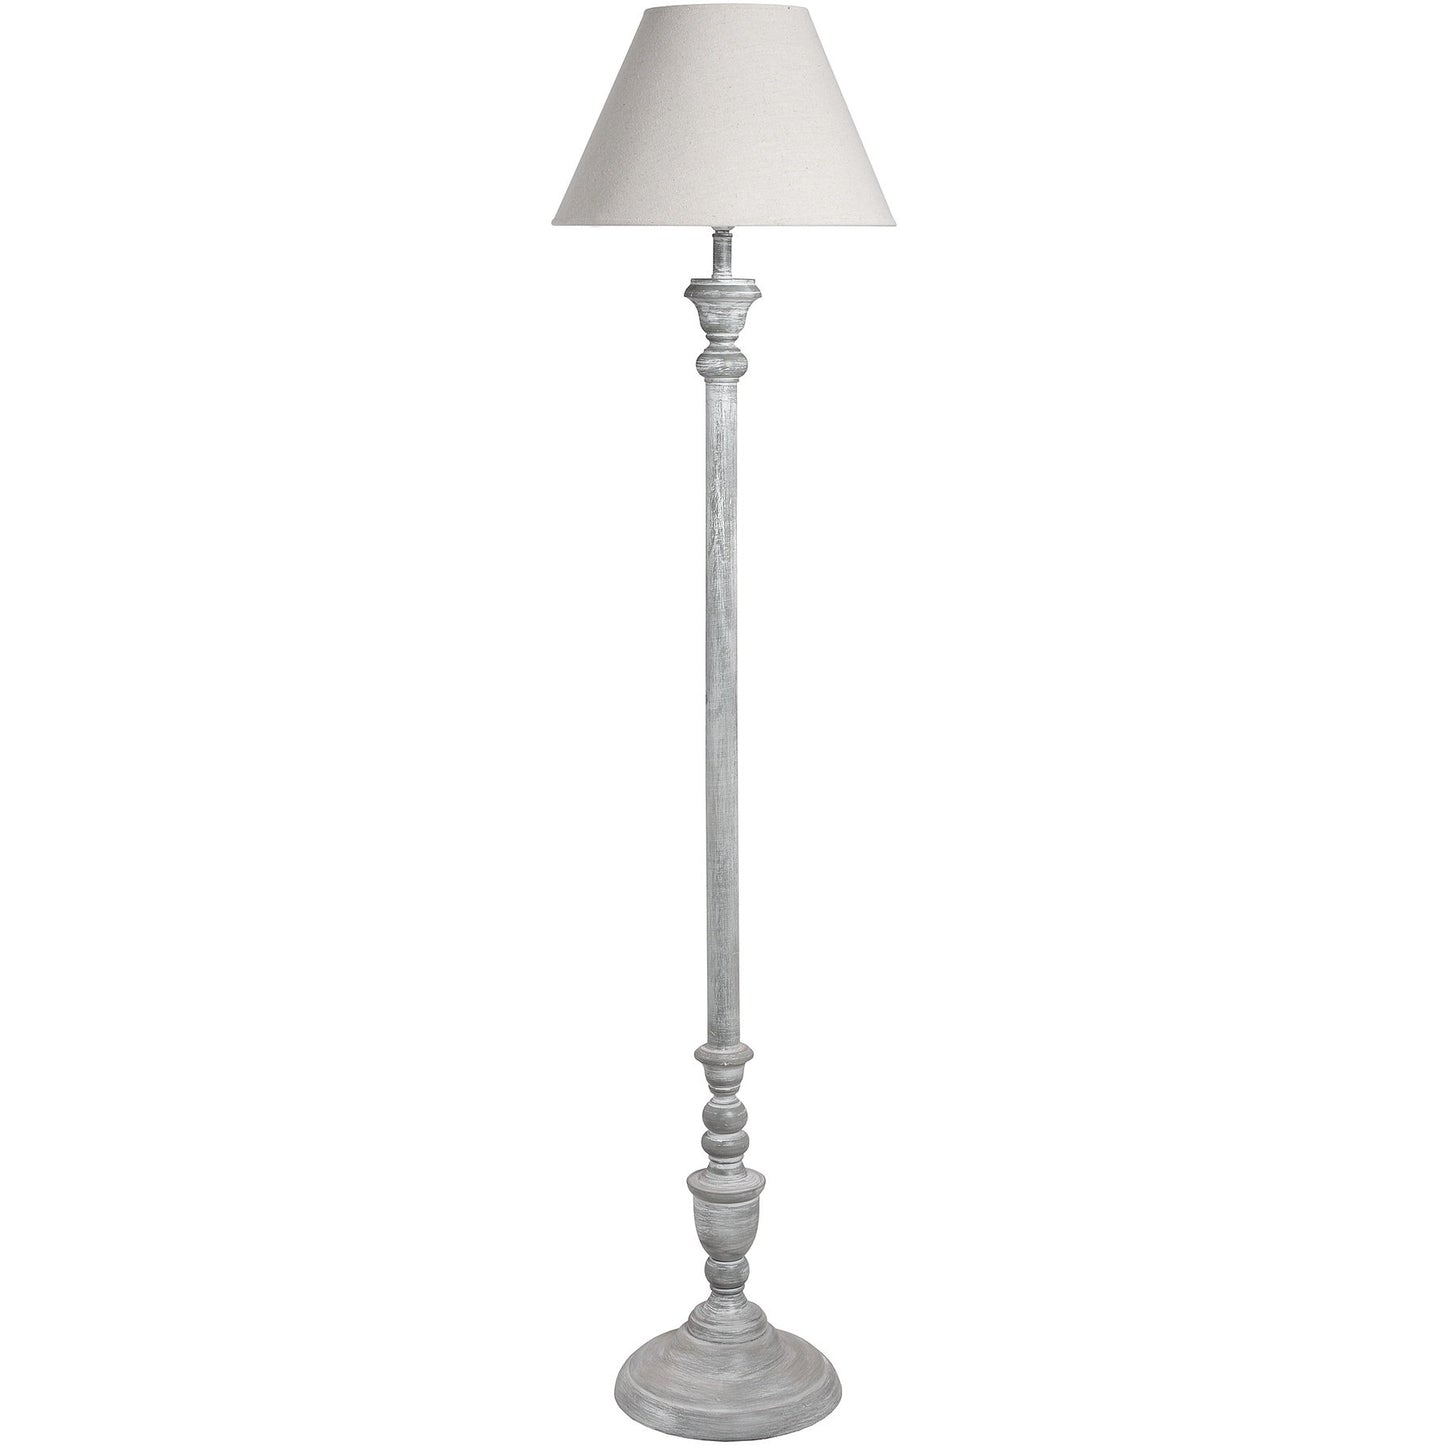 Washed wood Floor Lamp with linen lampshade